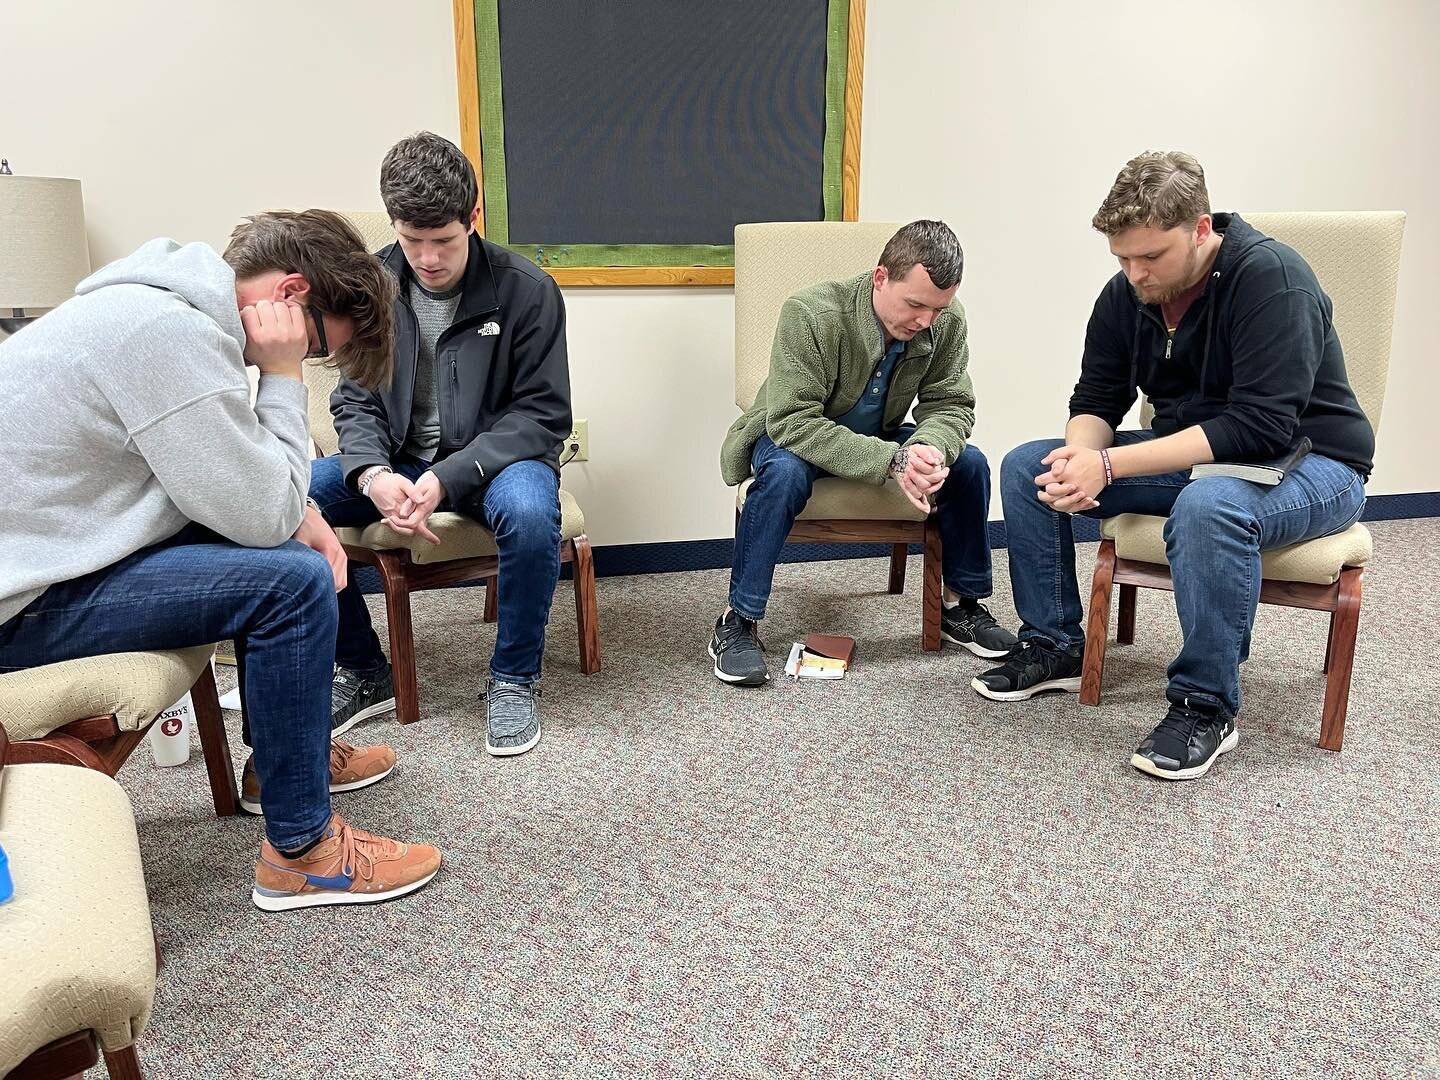 We dig deep by studying truth and praying together! Grow strong in community each Wednesday at 7 🌱 

#greenvillesc #churchlife #collegeministry #biblestudy #prayer #community